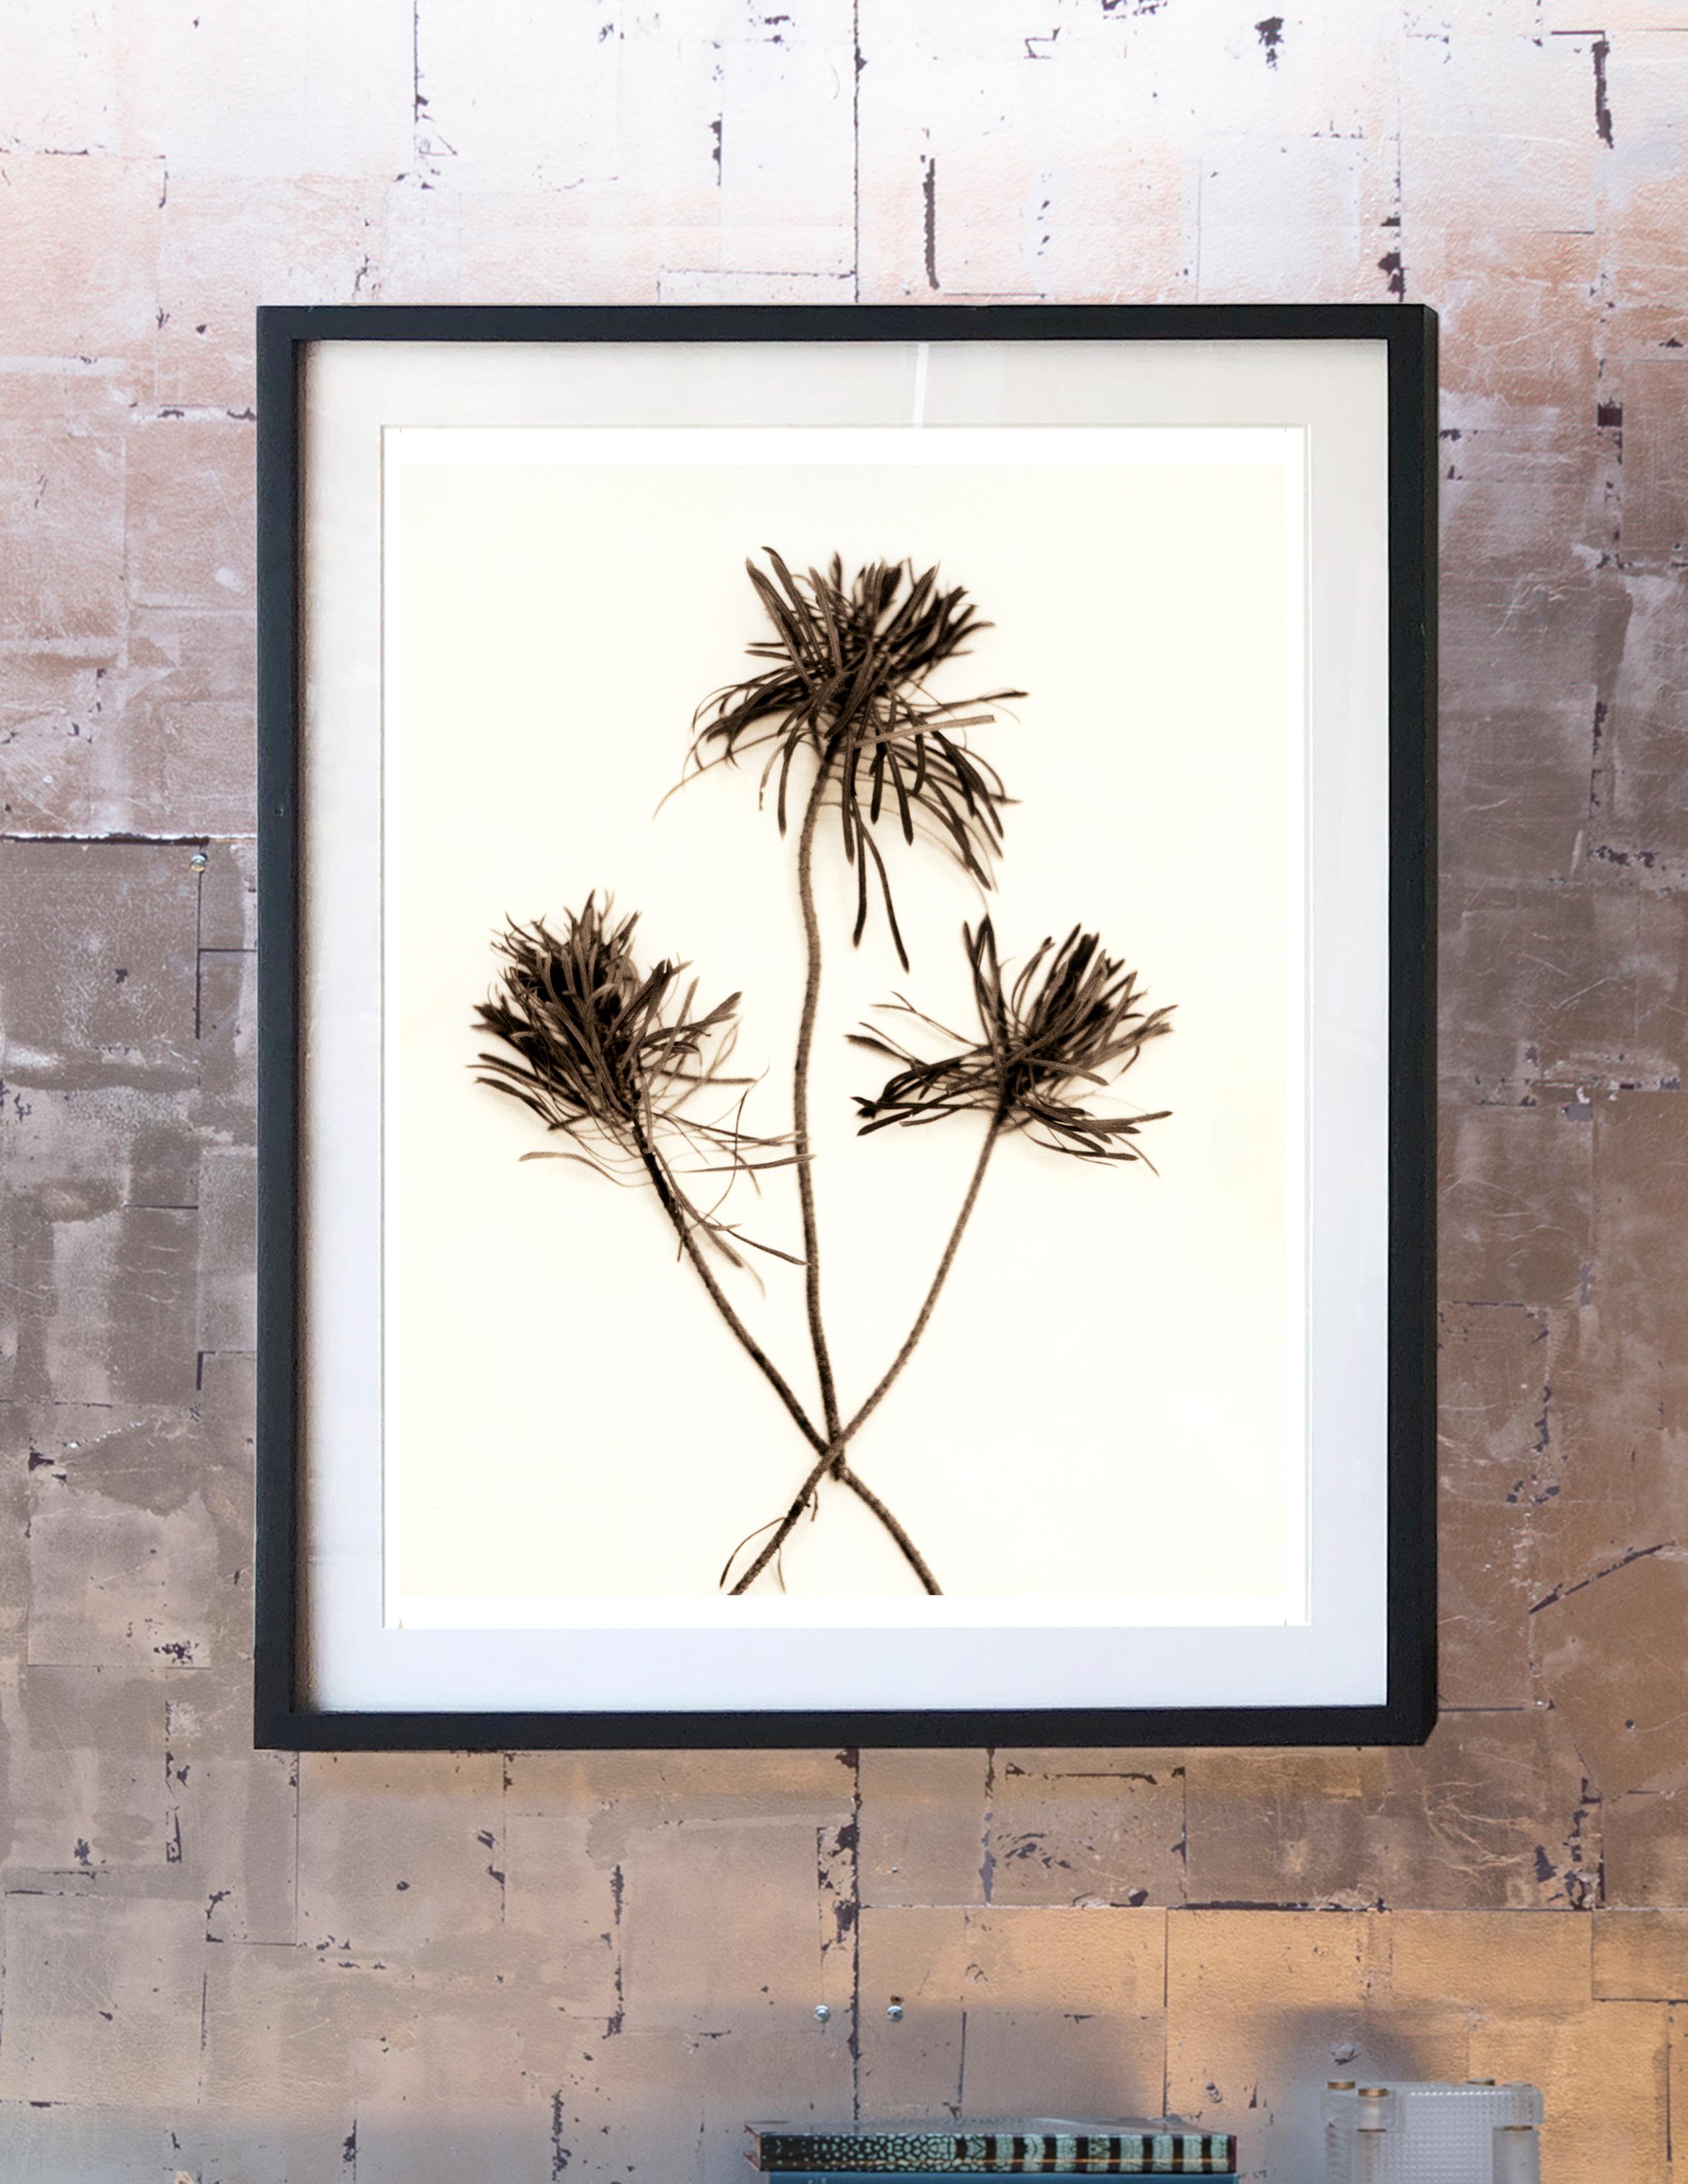 American Digital Prints Based on Hand-Toned Silver Gelatin Prints, Branch Series For Sale